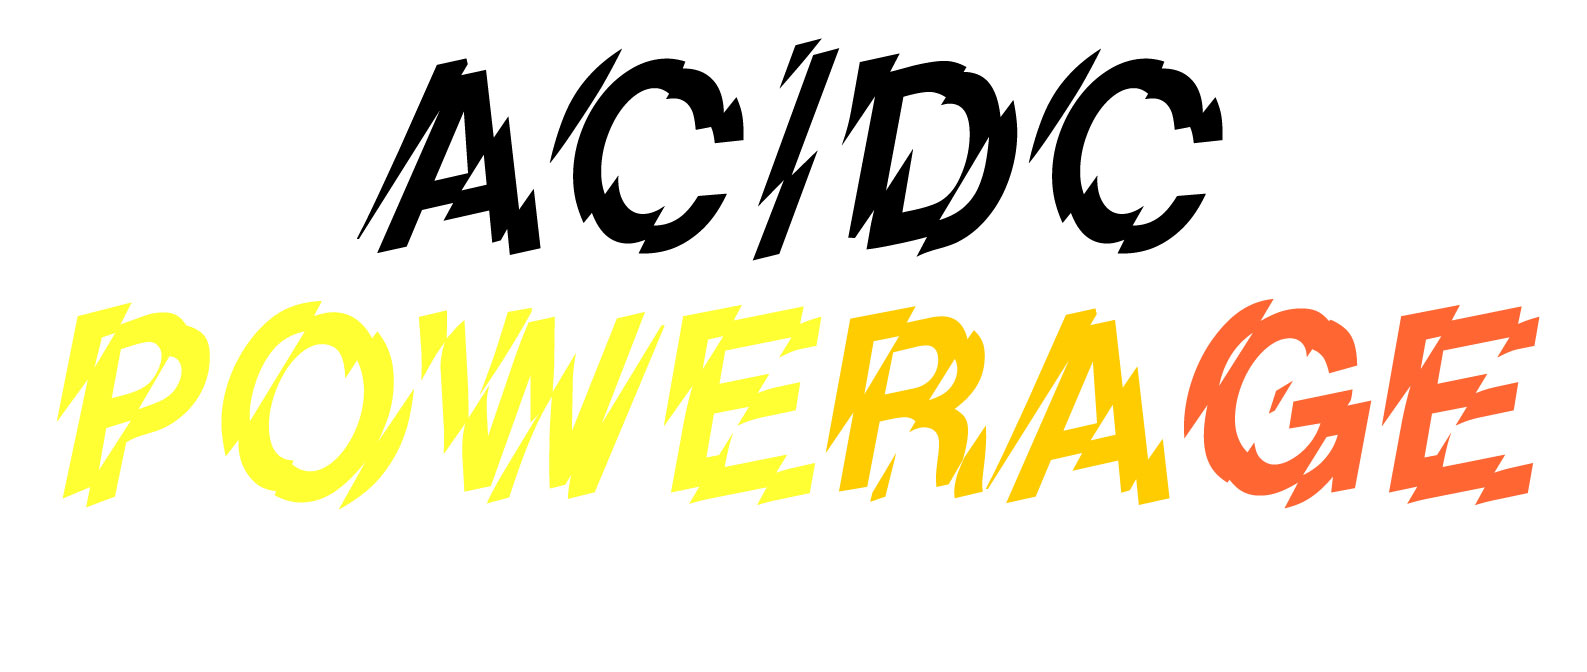 Ac Dc Logos And Lettering What S That Font